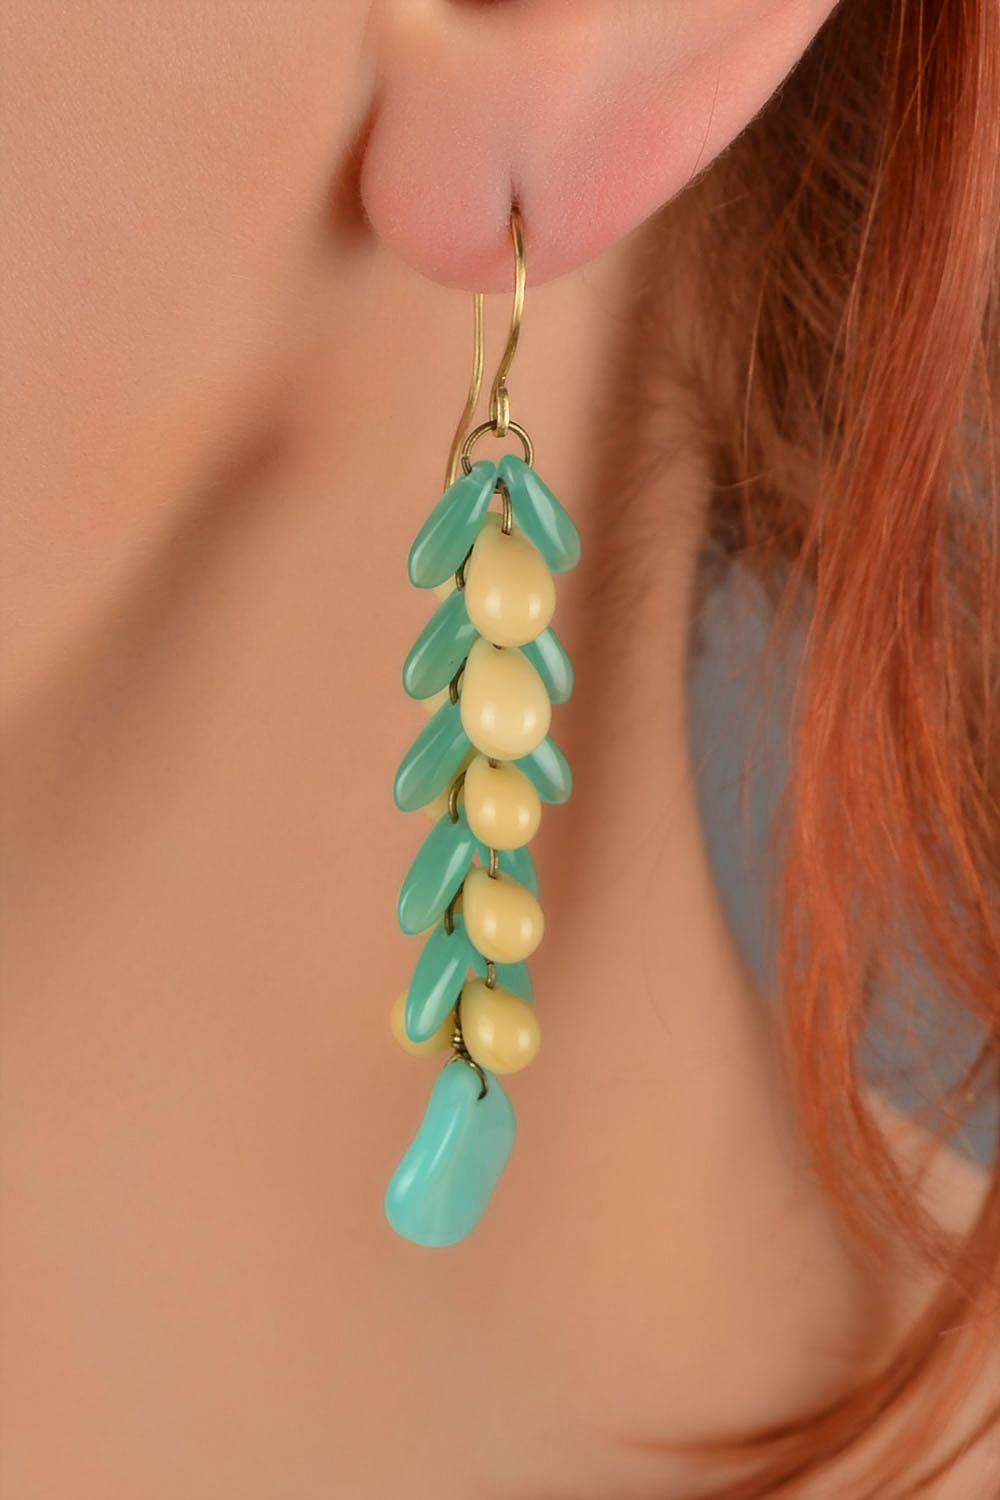 Handmade long dangling earrings with beige and mint colored glass beads photo 5